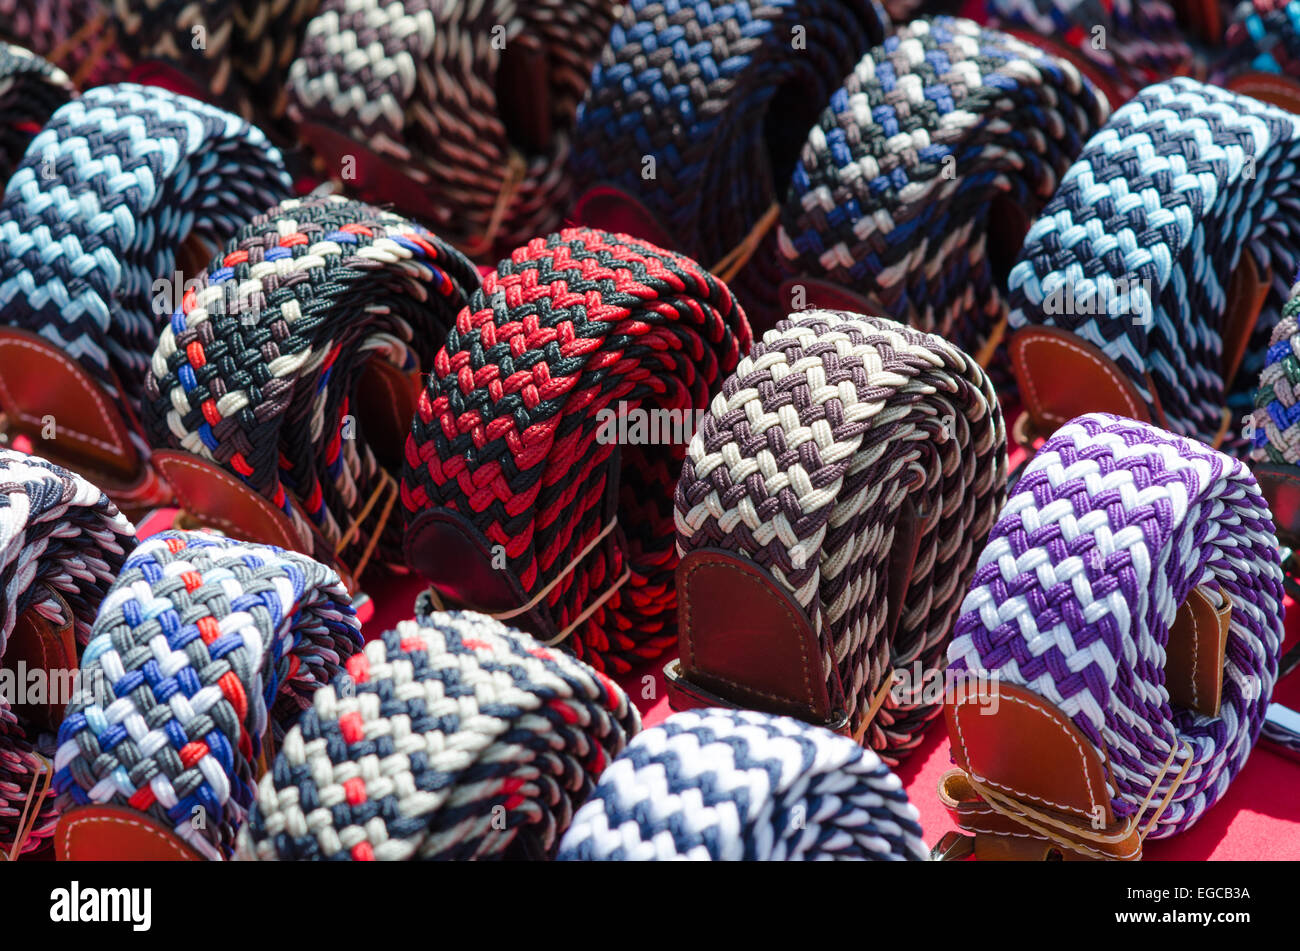 italian style textile waistbands on a desk of a market in Milan Stock Photo